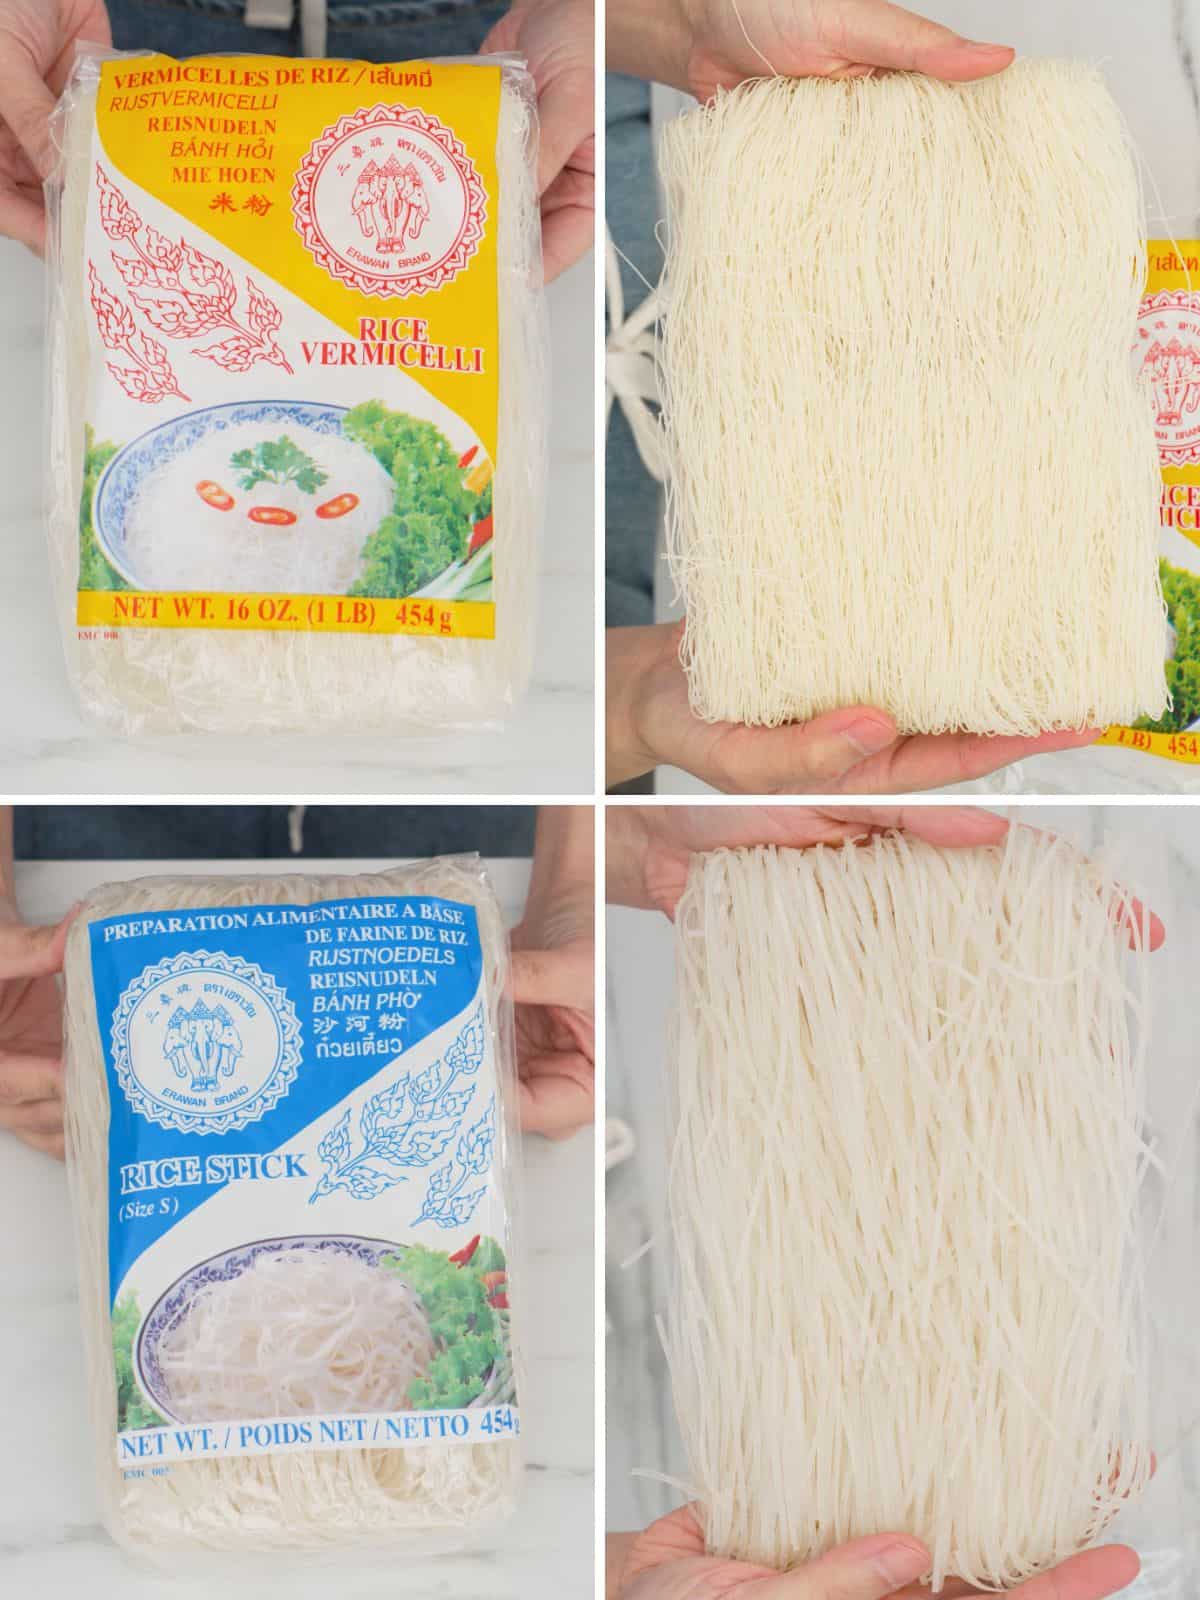 a grid of rice vermicelli in package and out of package, and small size rice noodles in package and out of package